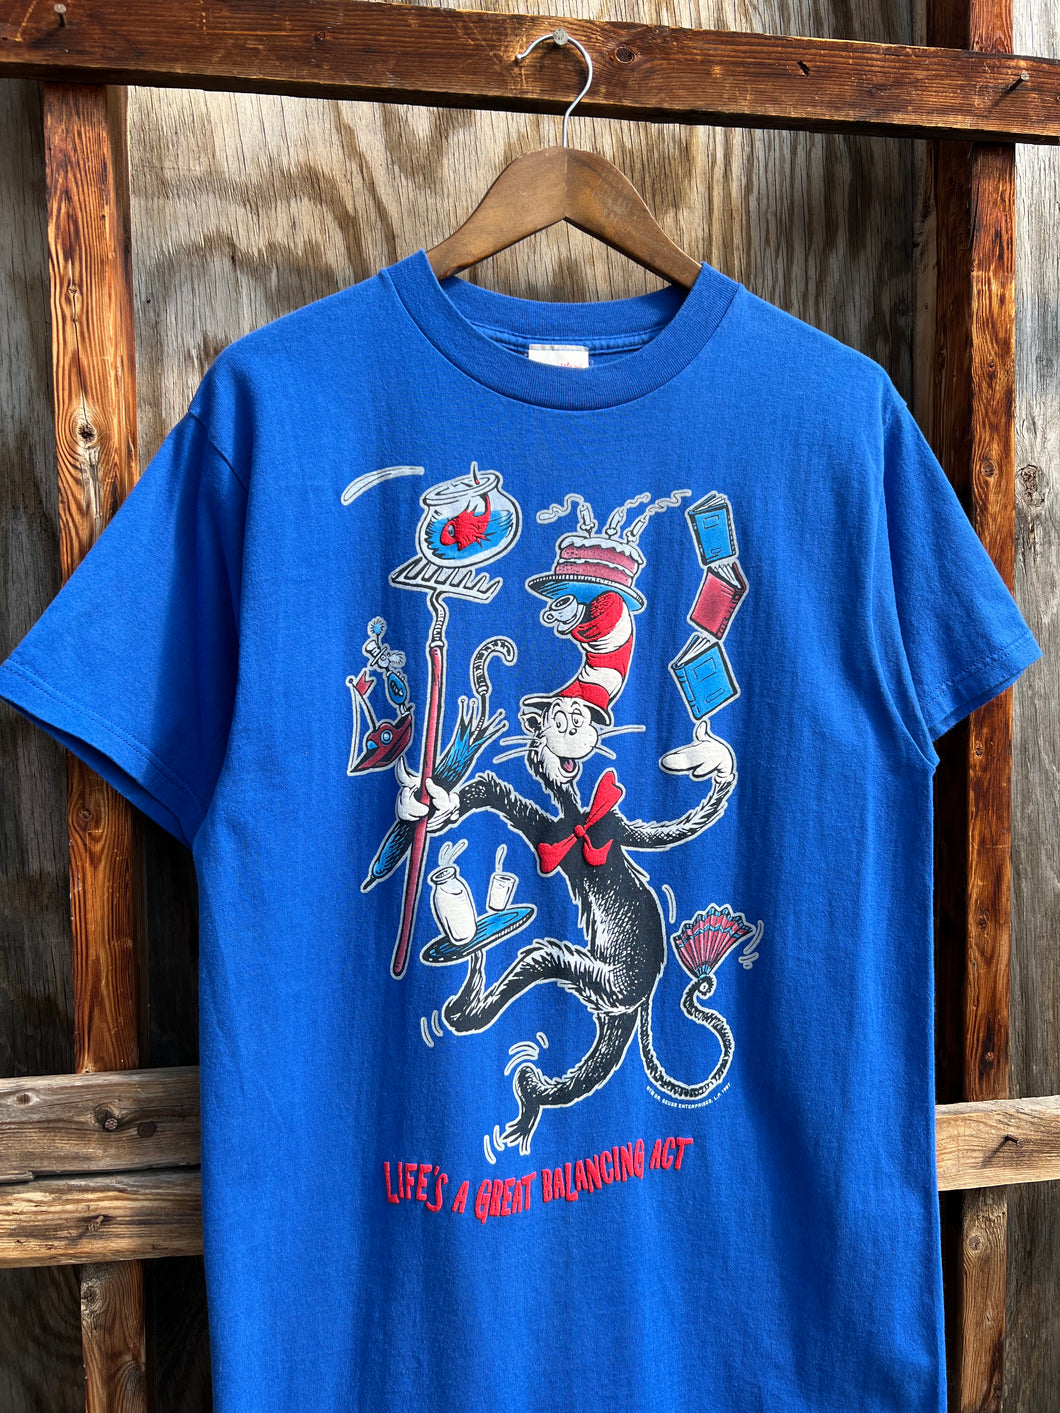 Vintage 1997 Cat in the Hat Puffy Print Tee (M)